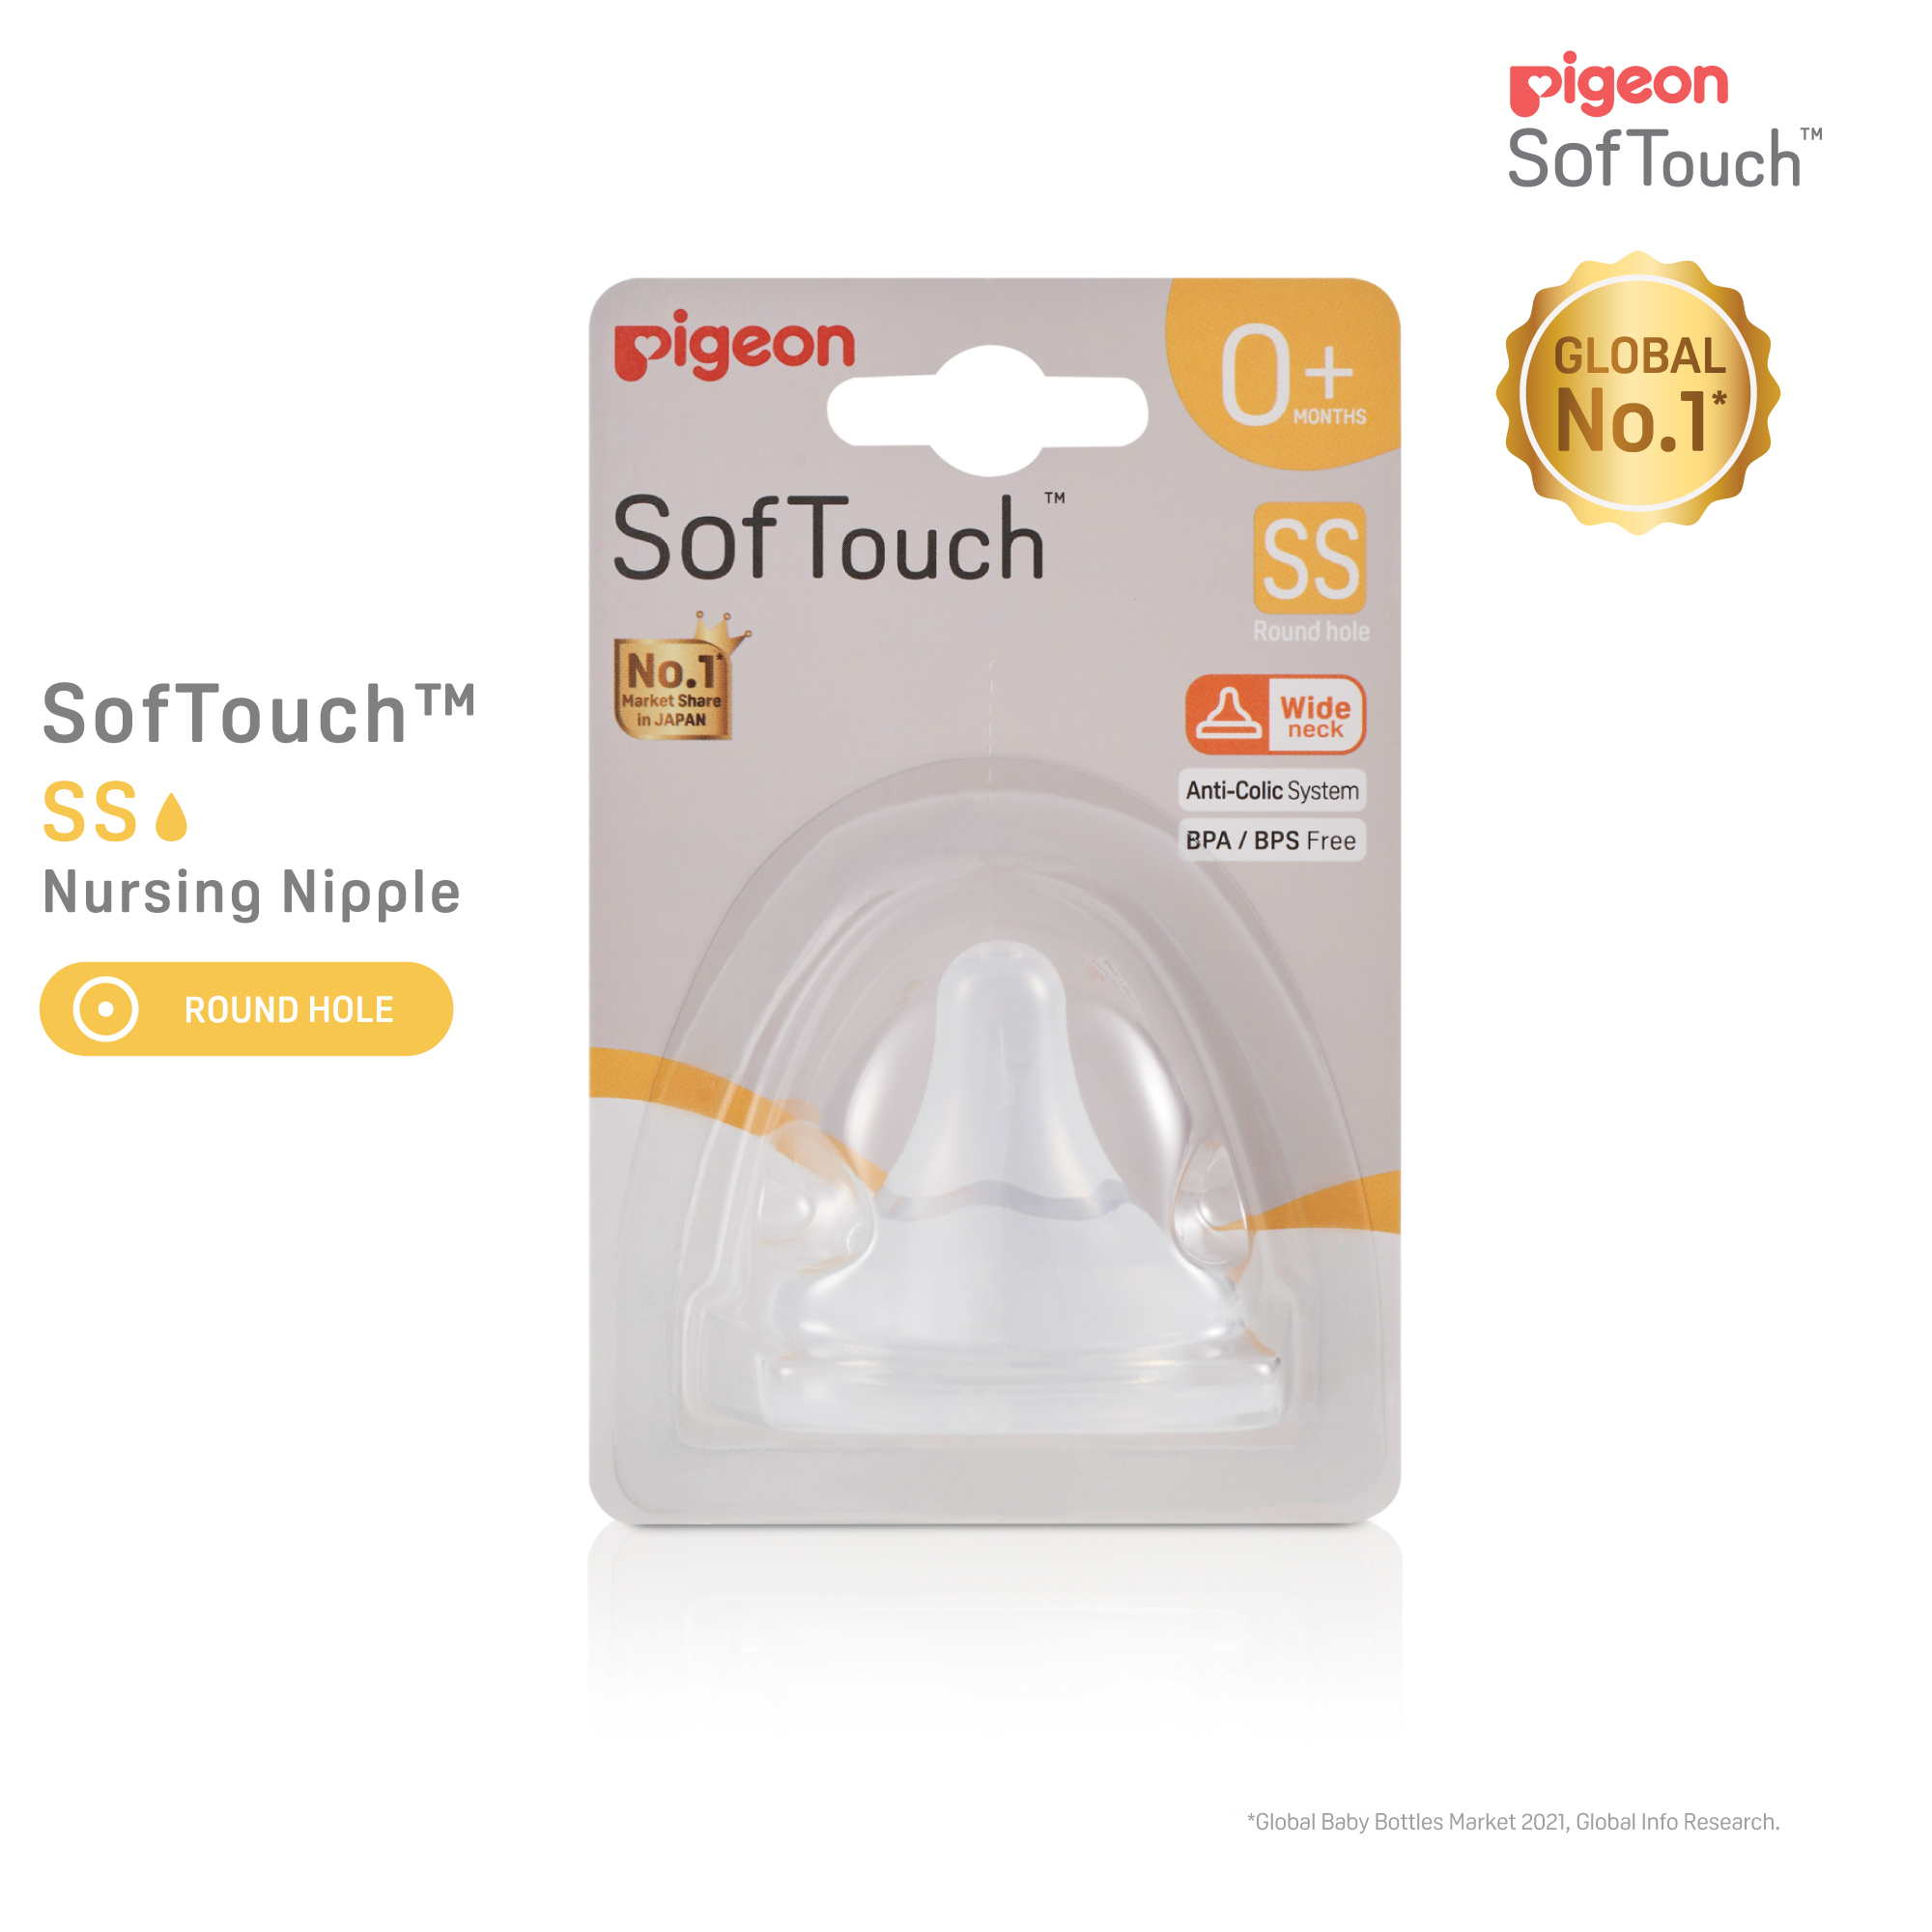 Pigeon SofTouch 3 Nipple Blister Pack 1pc (SS) (PG-79461)